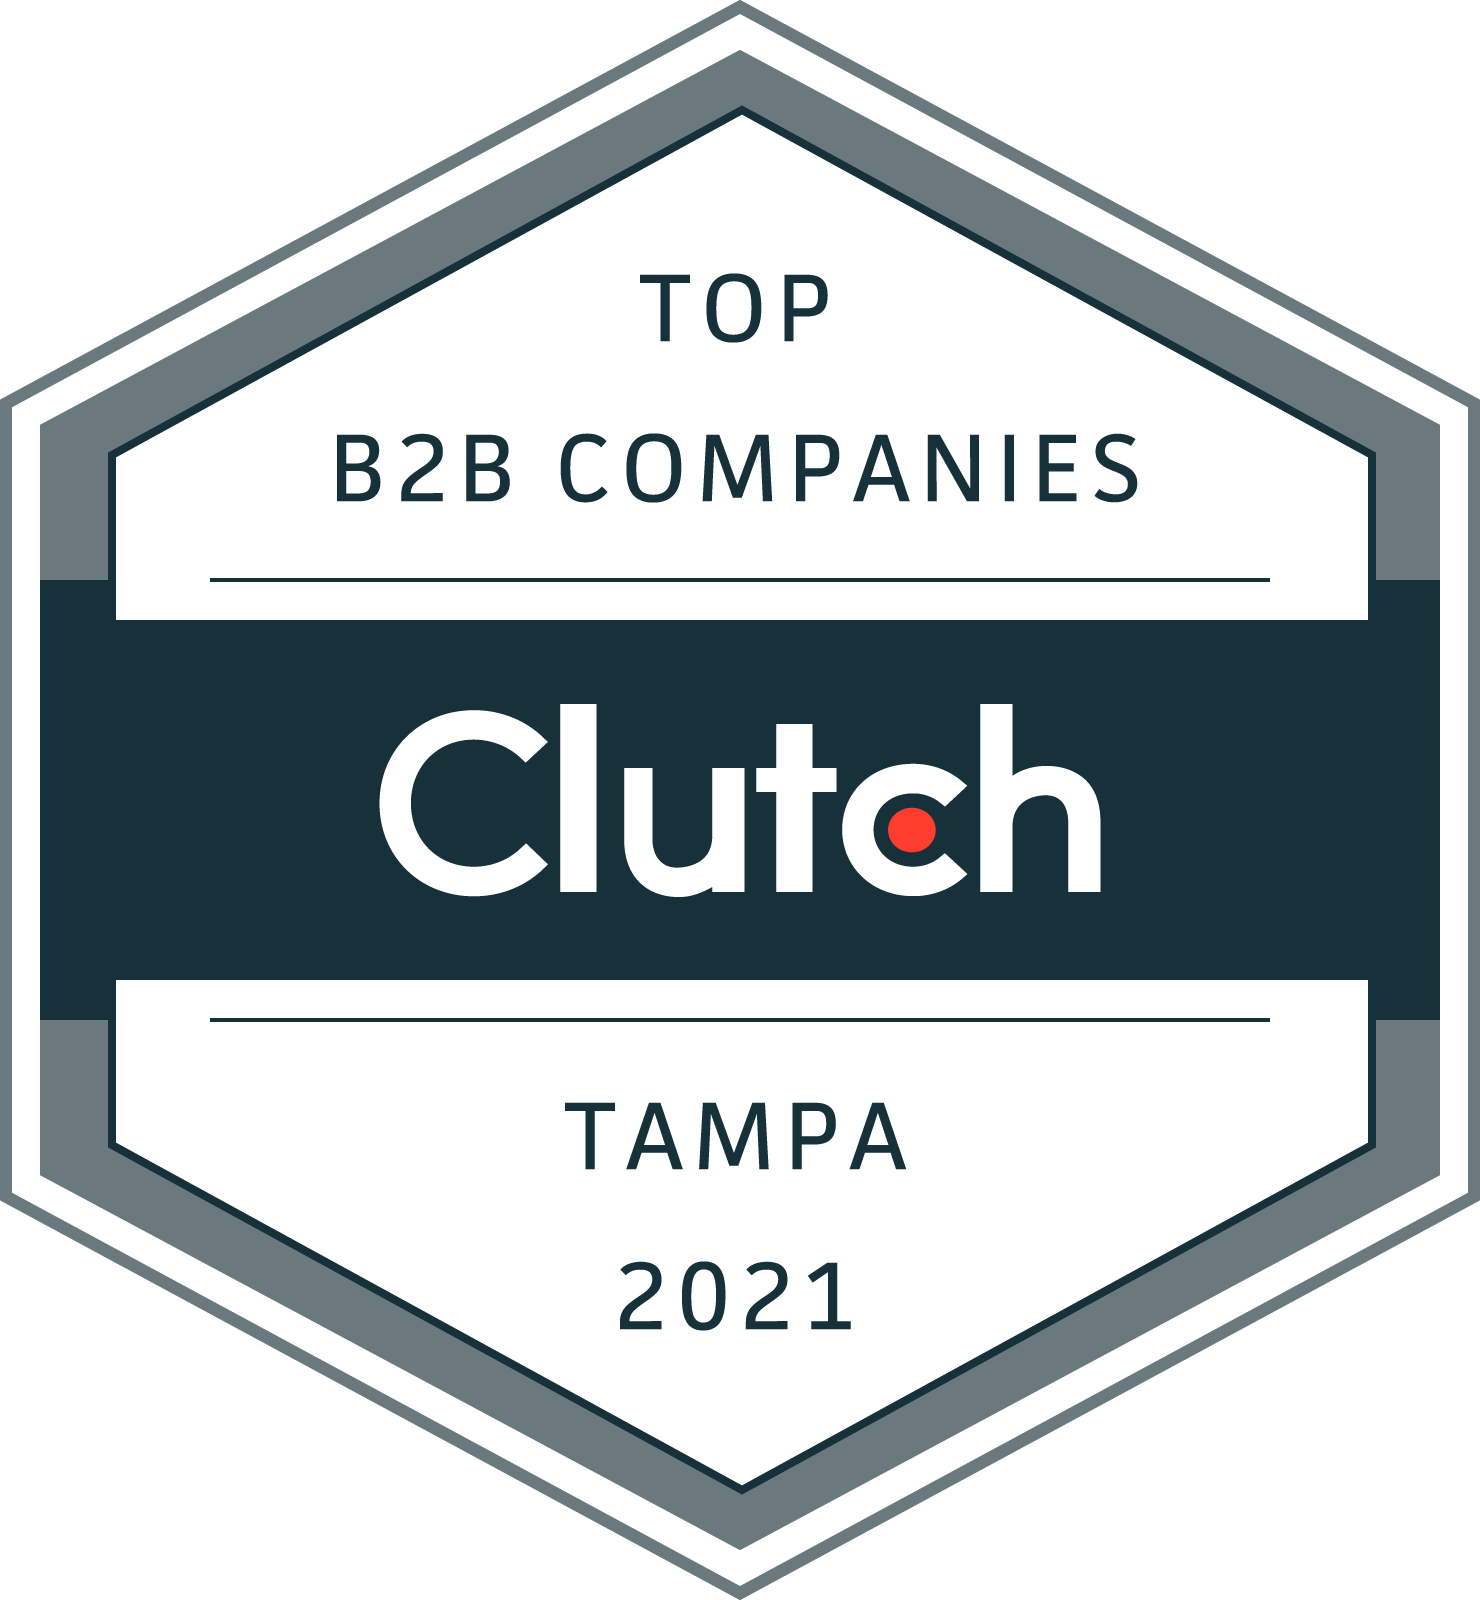 Clutch badge for Tampa's top B2B firms